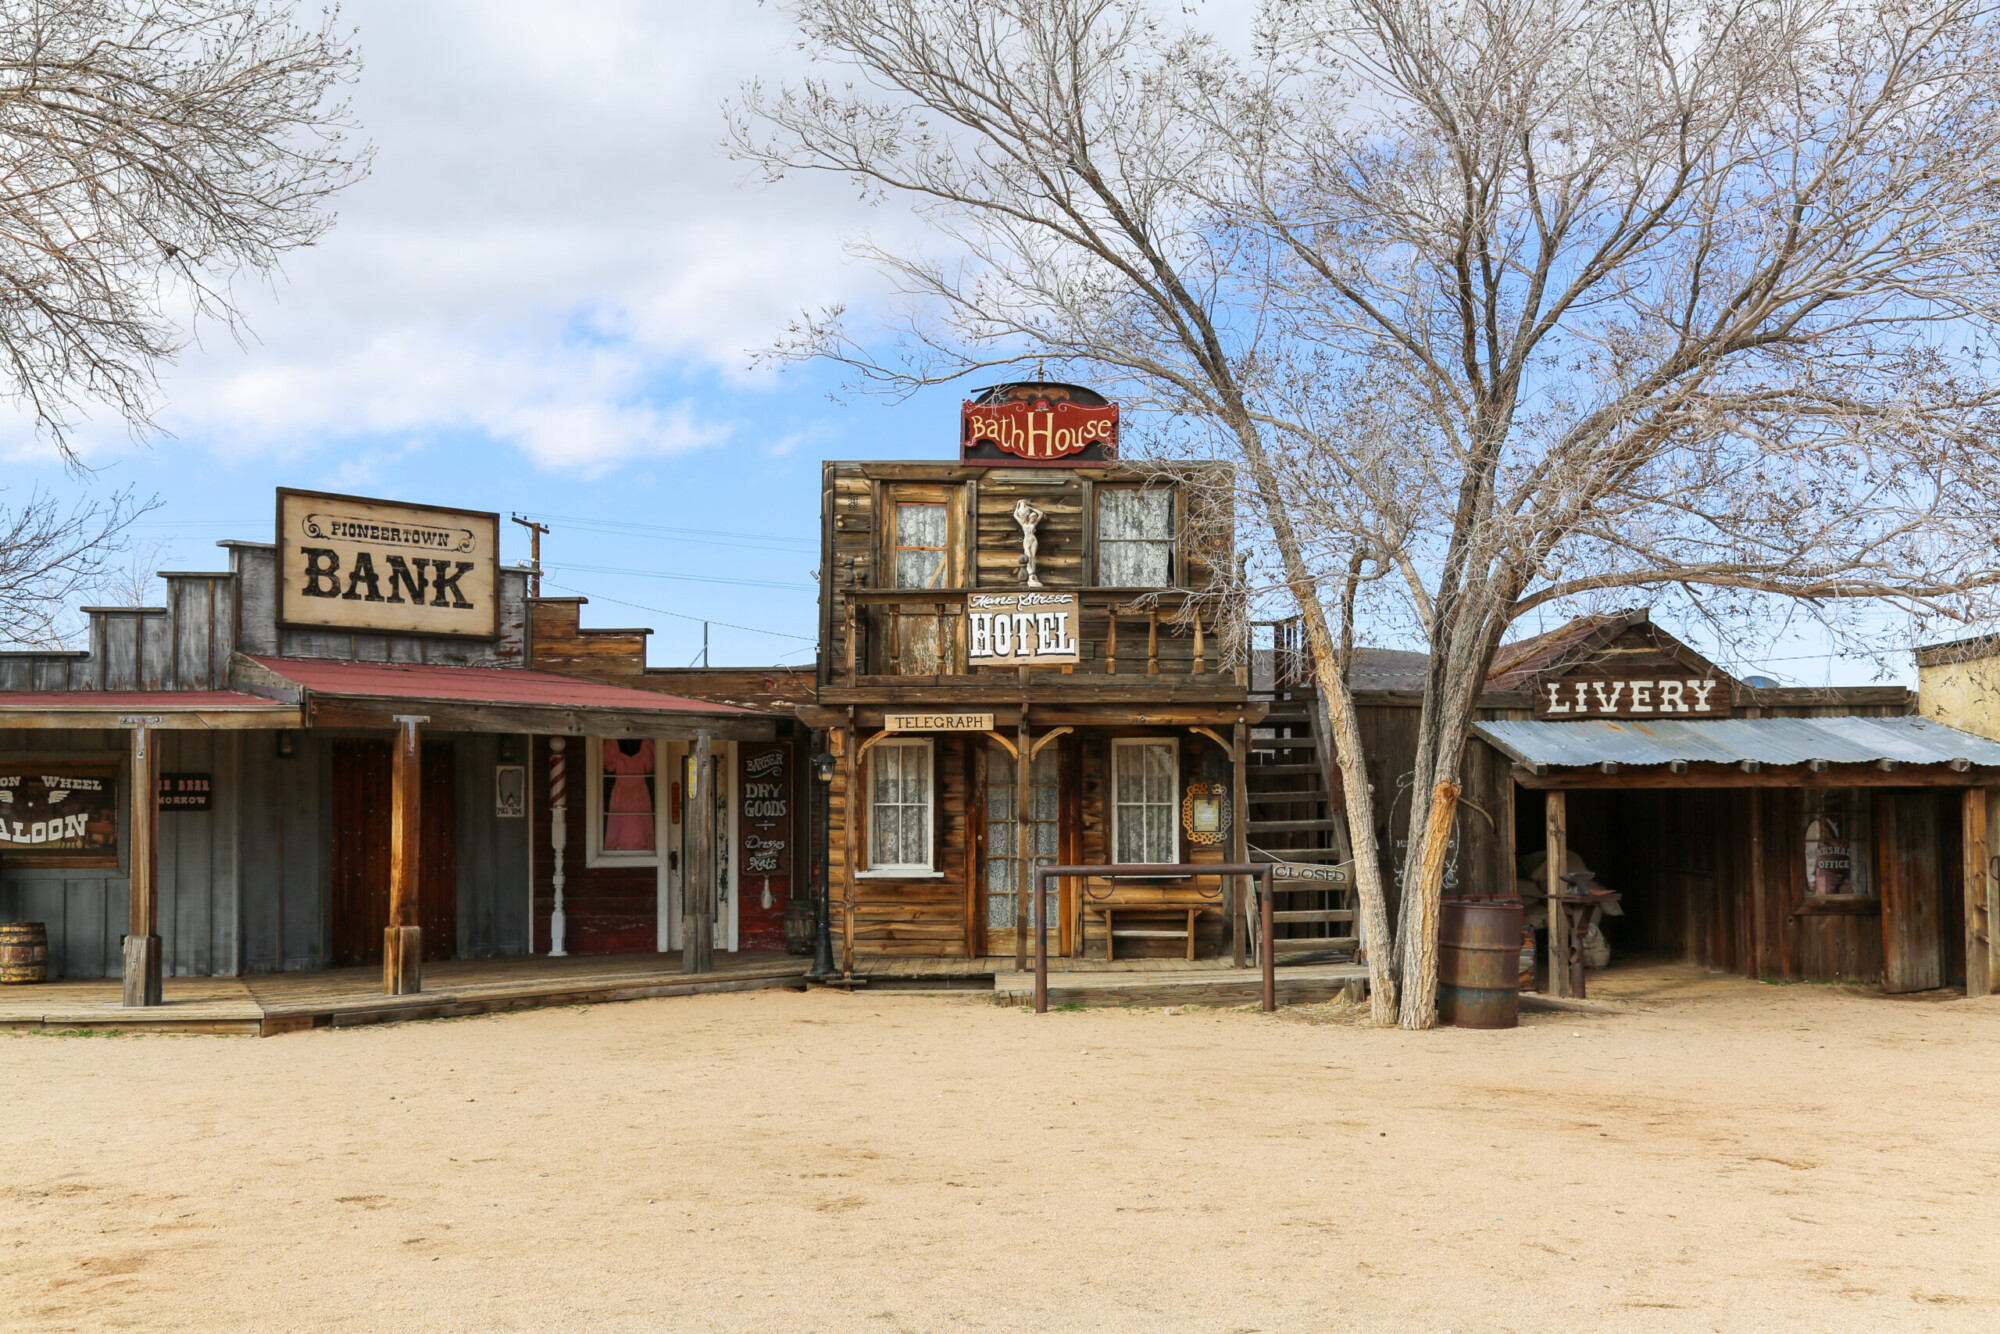 Three Western themed buildings labeled Bank, Bath House, and Livery, on Mane Street in Pioneertown, California.